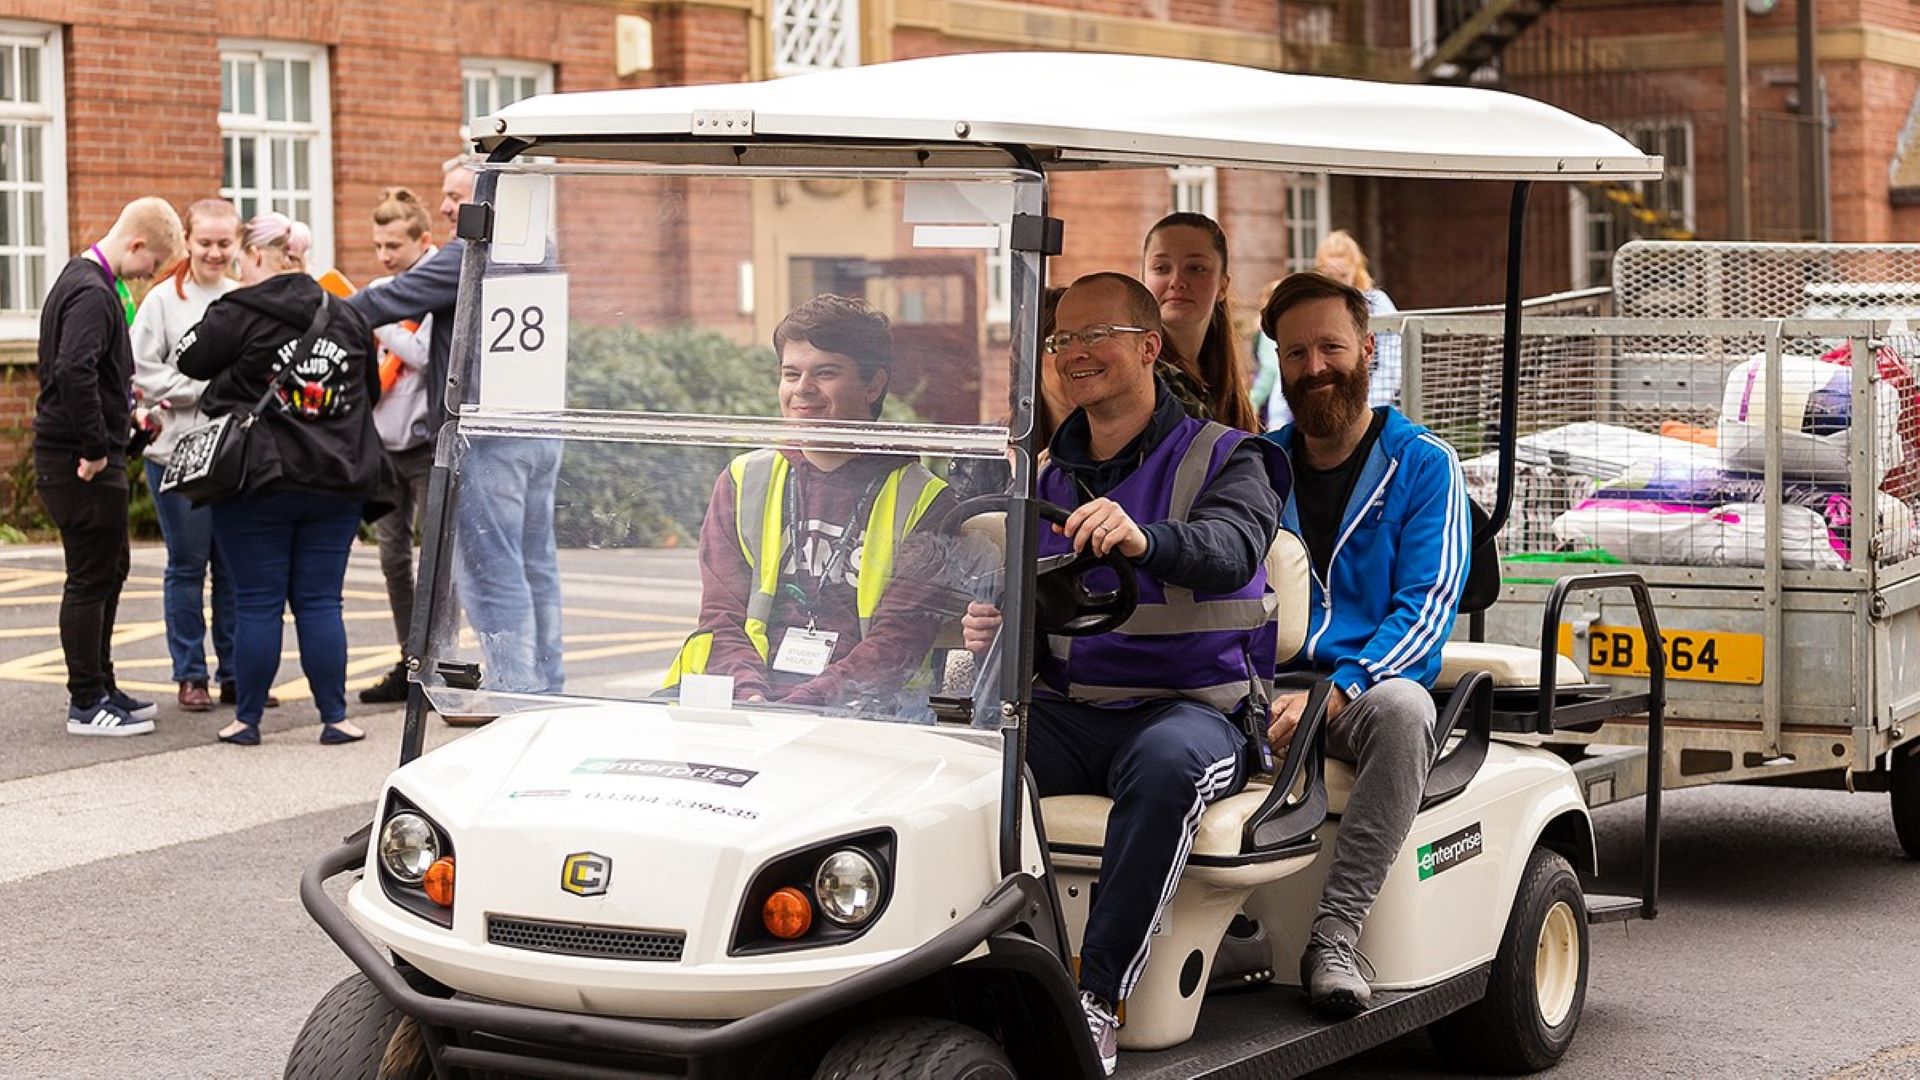 A member of Edge Hill staff drives a golf buggy with three visitors and their luggage on board.